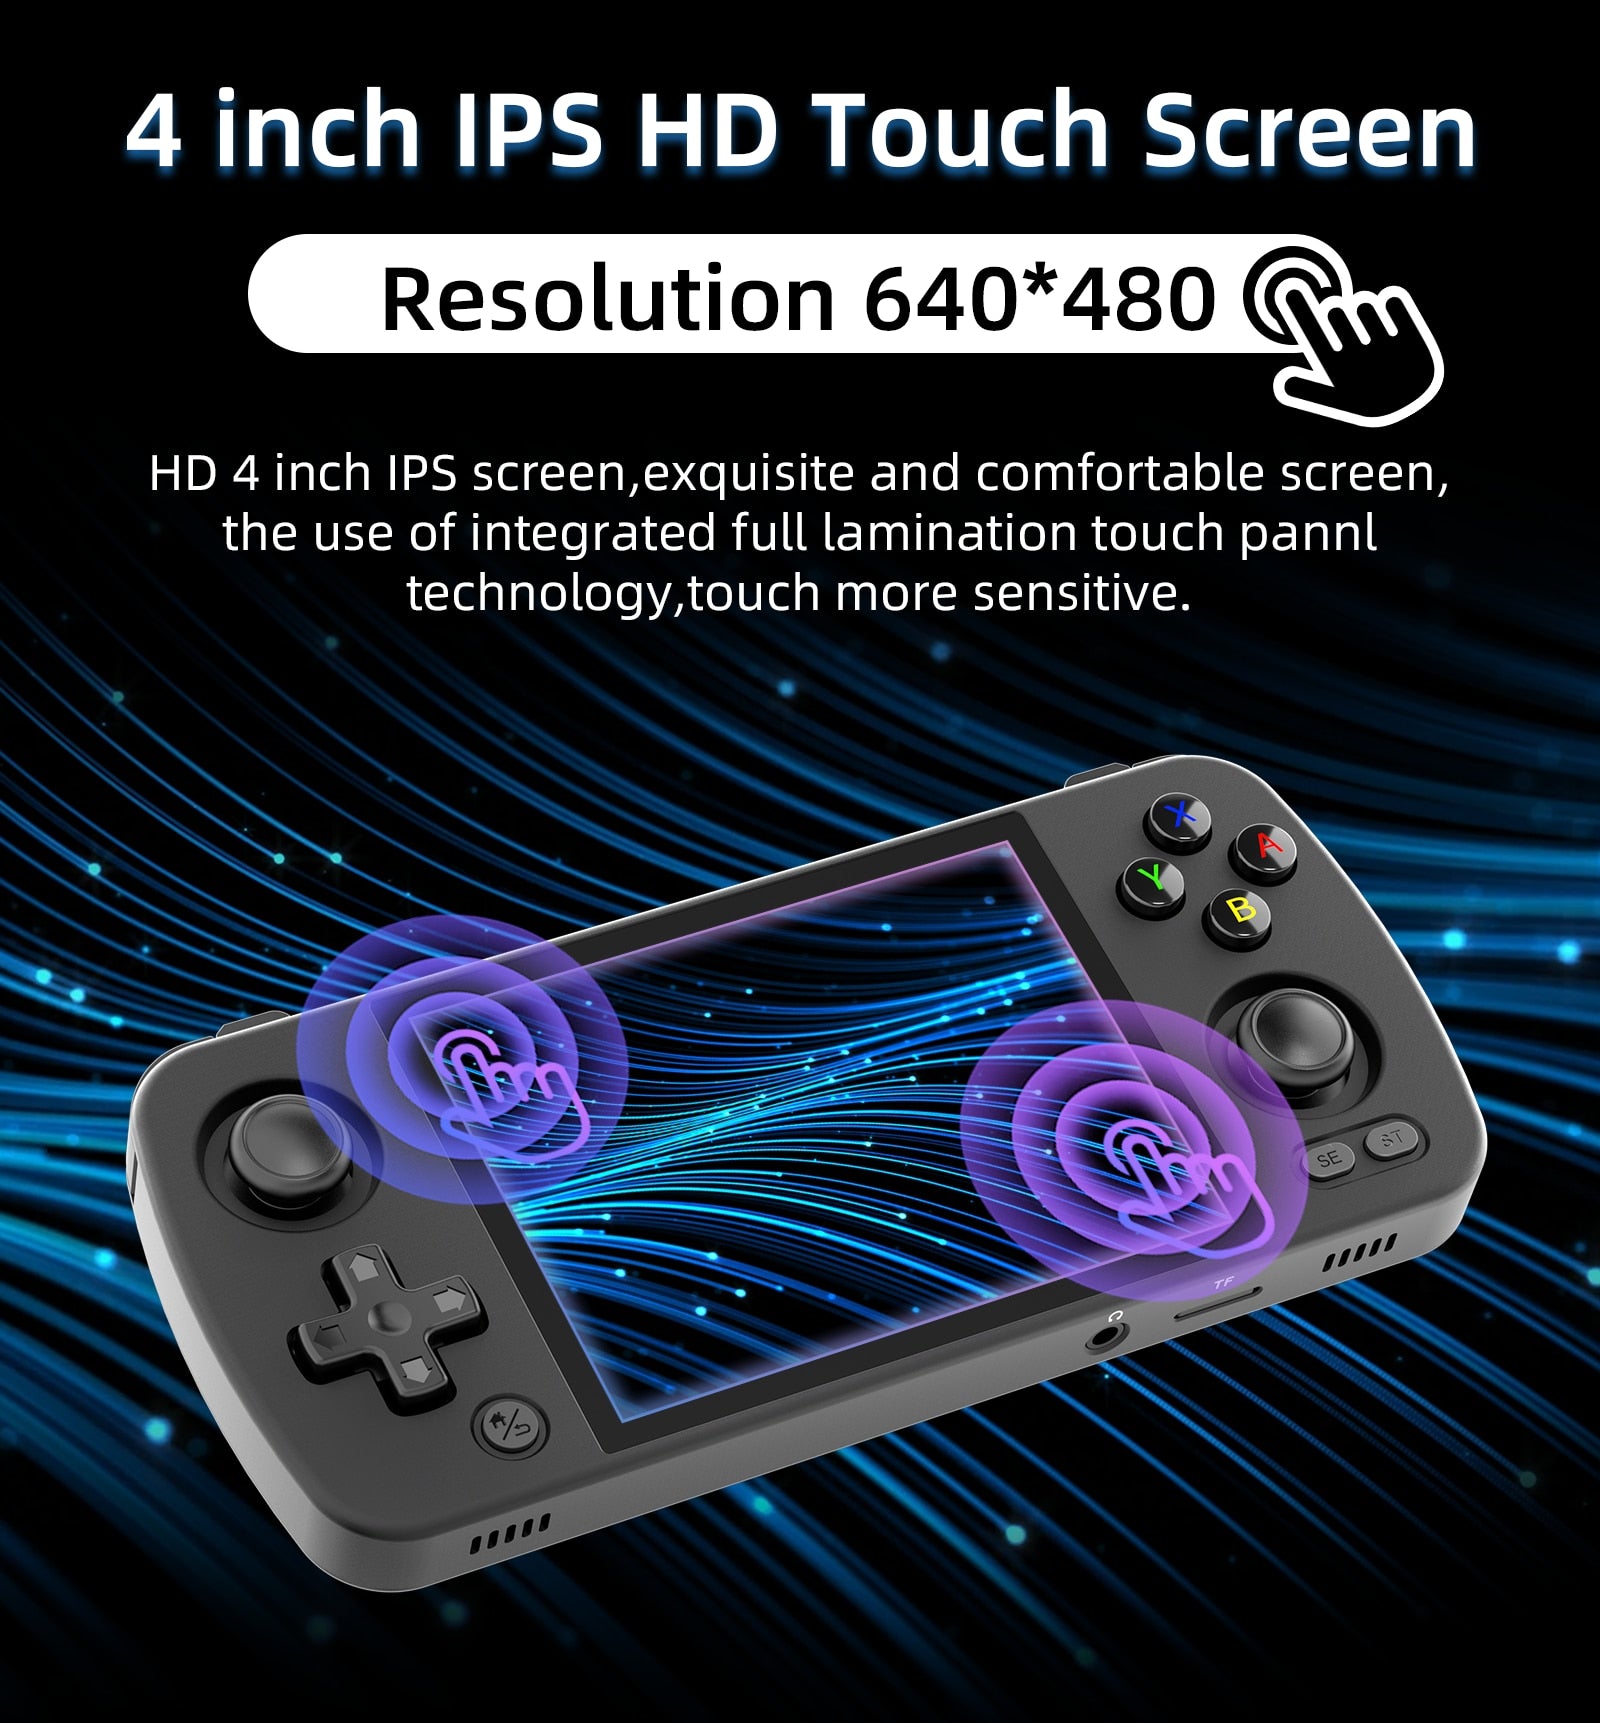 ANBERNIC RG405M Retro Handheld Game Console Android 12 4 inch IPS